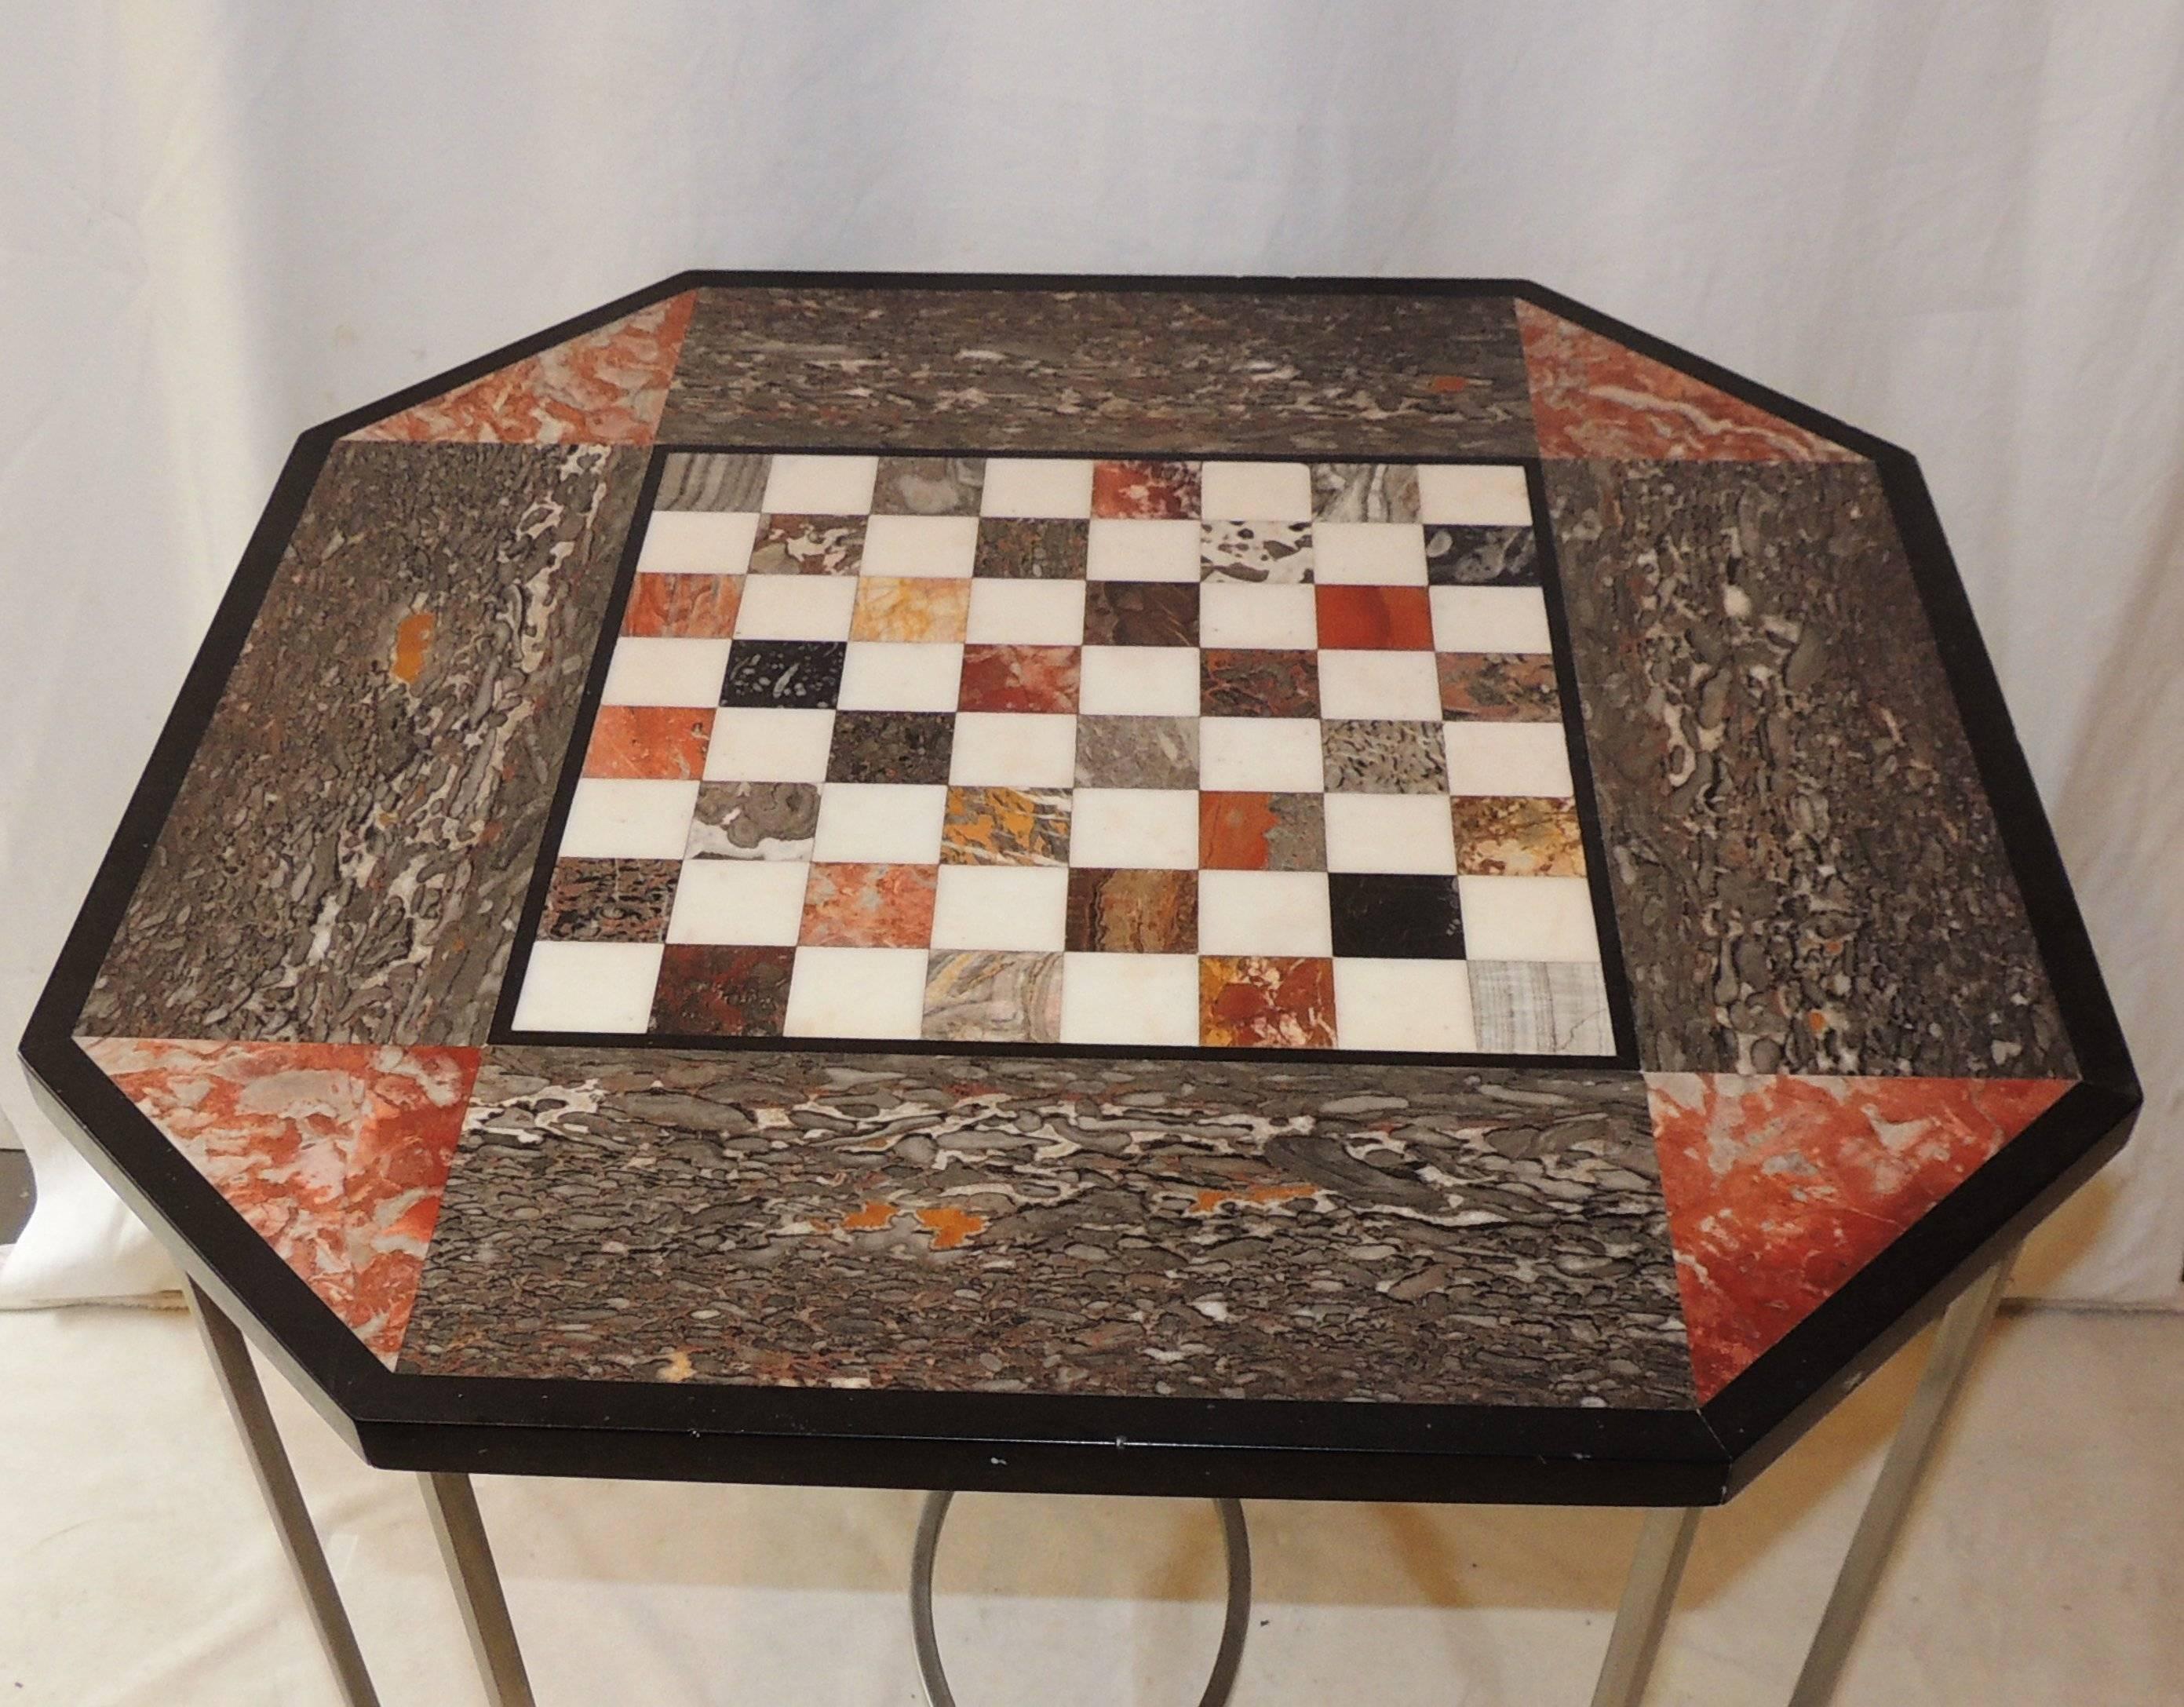 Italian Wonderful Marble Inset Mosaic Top Chess Game Table Brushed Silvered Square Base